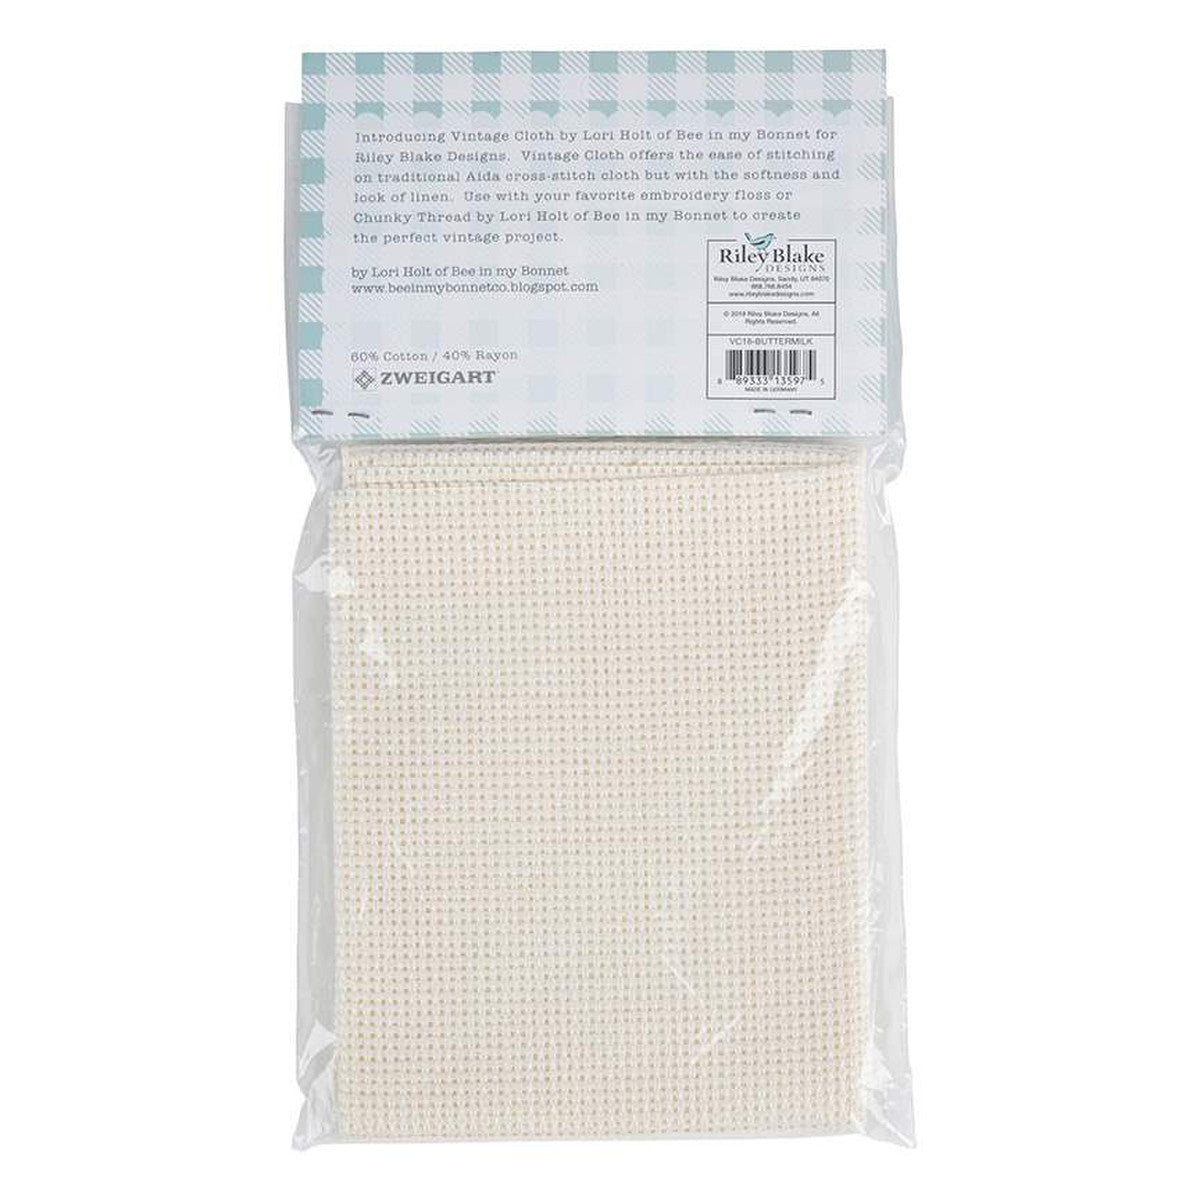 10-Count Tula -- Buttermilk Color -- Vintage Cloth Cross-Stich Fabric --- 17in x 17in by Lory Holt®